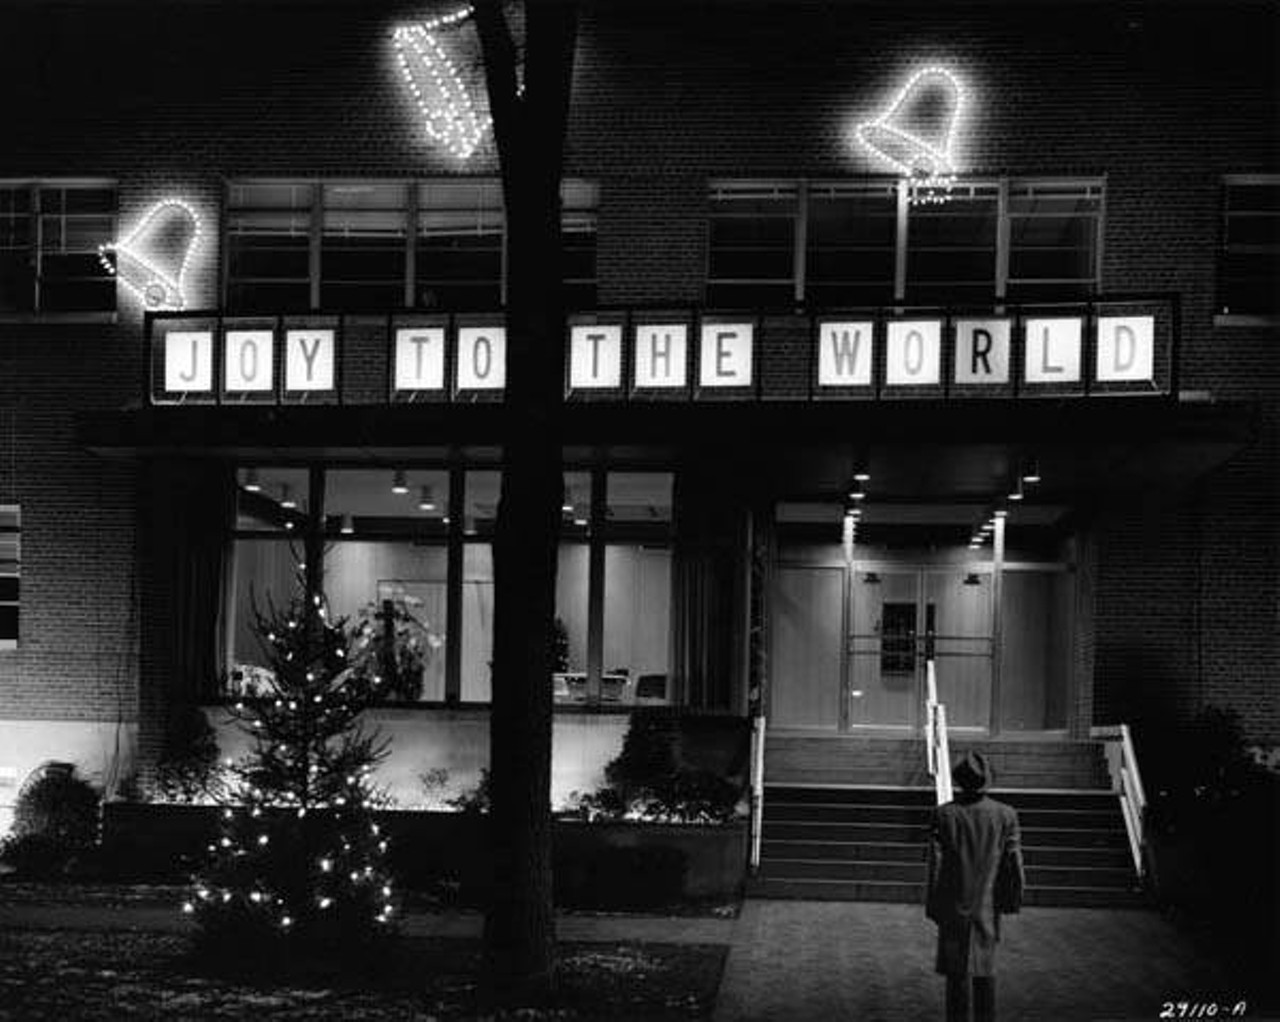 Joy to the World lettering at G.E. Christmas display, 1957.